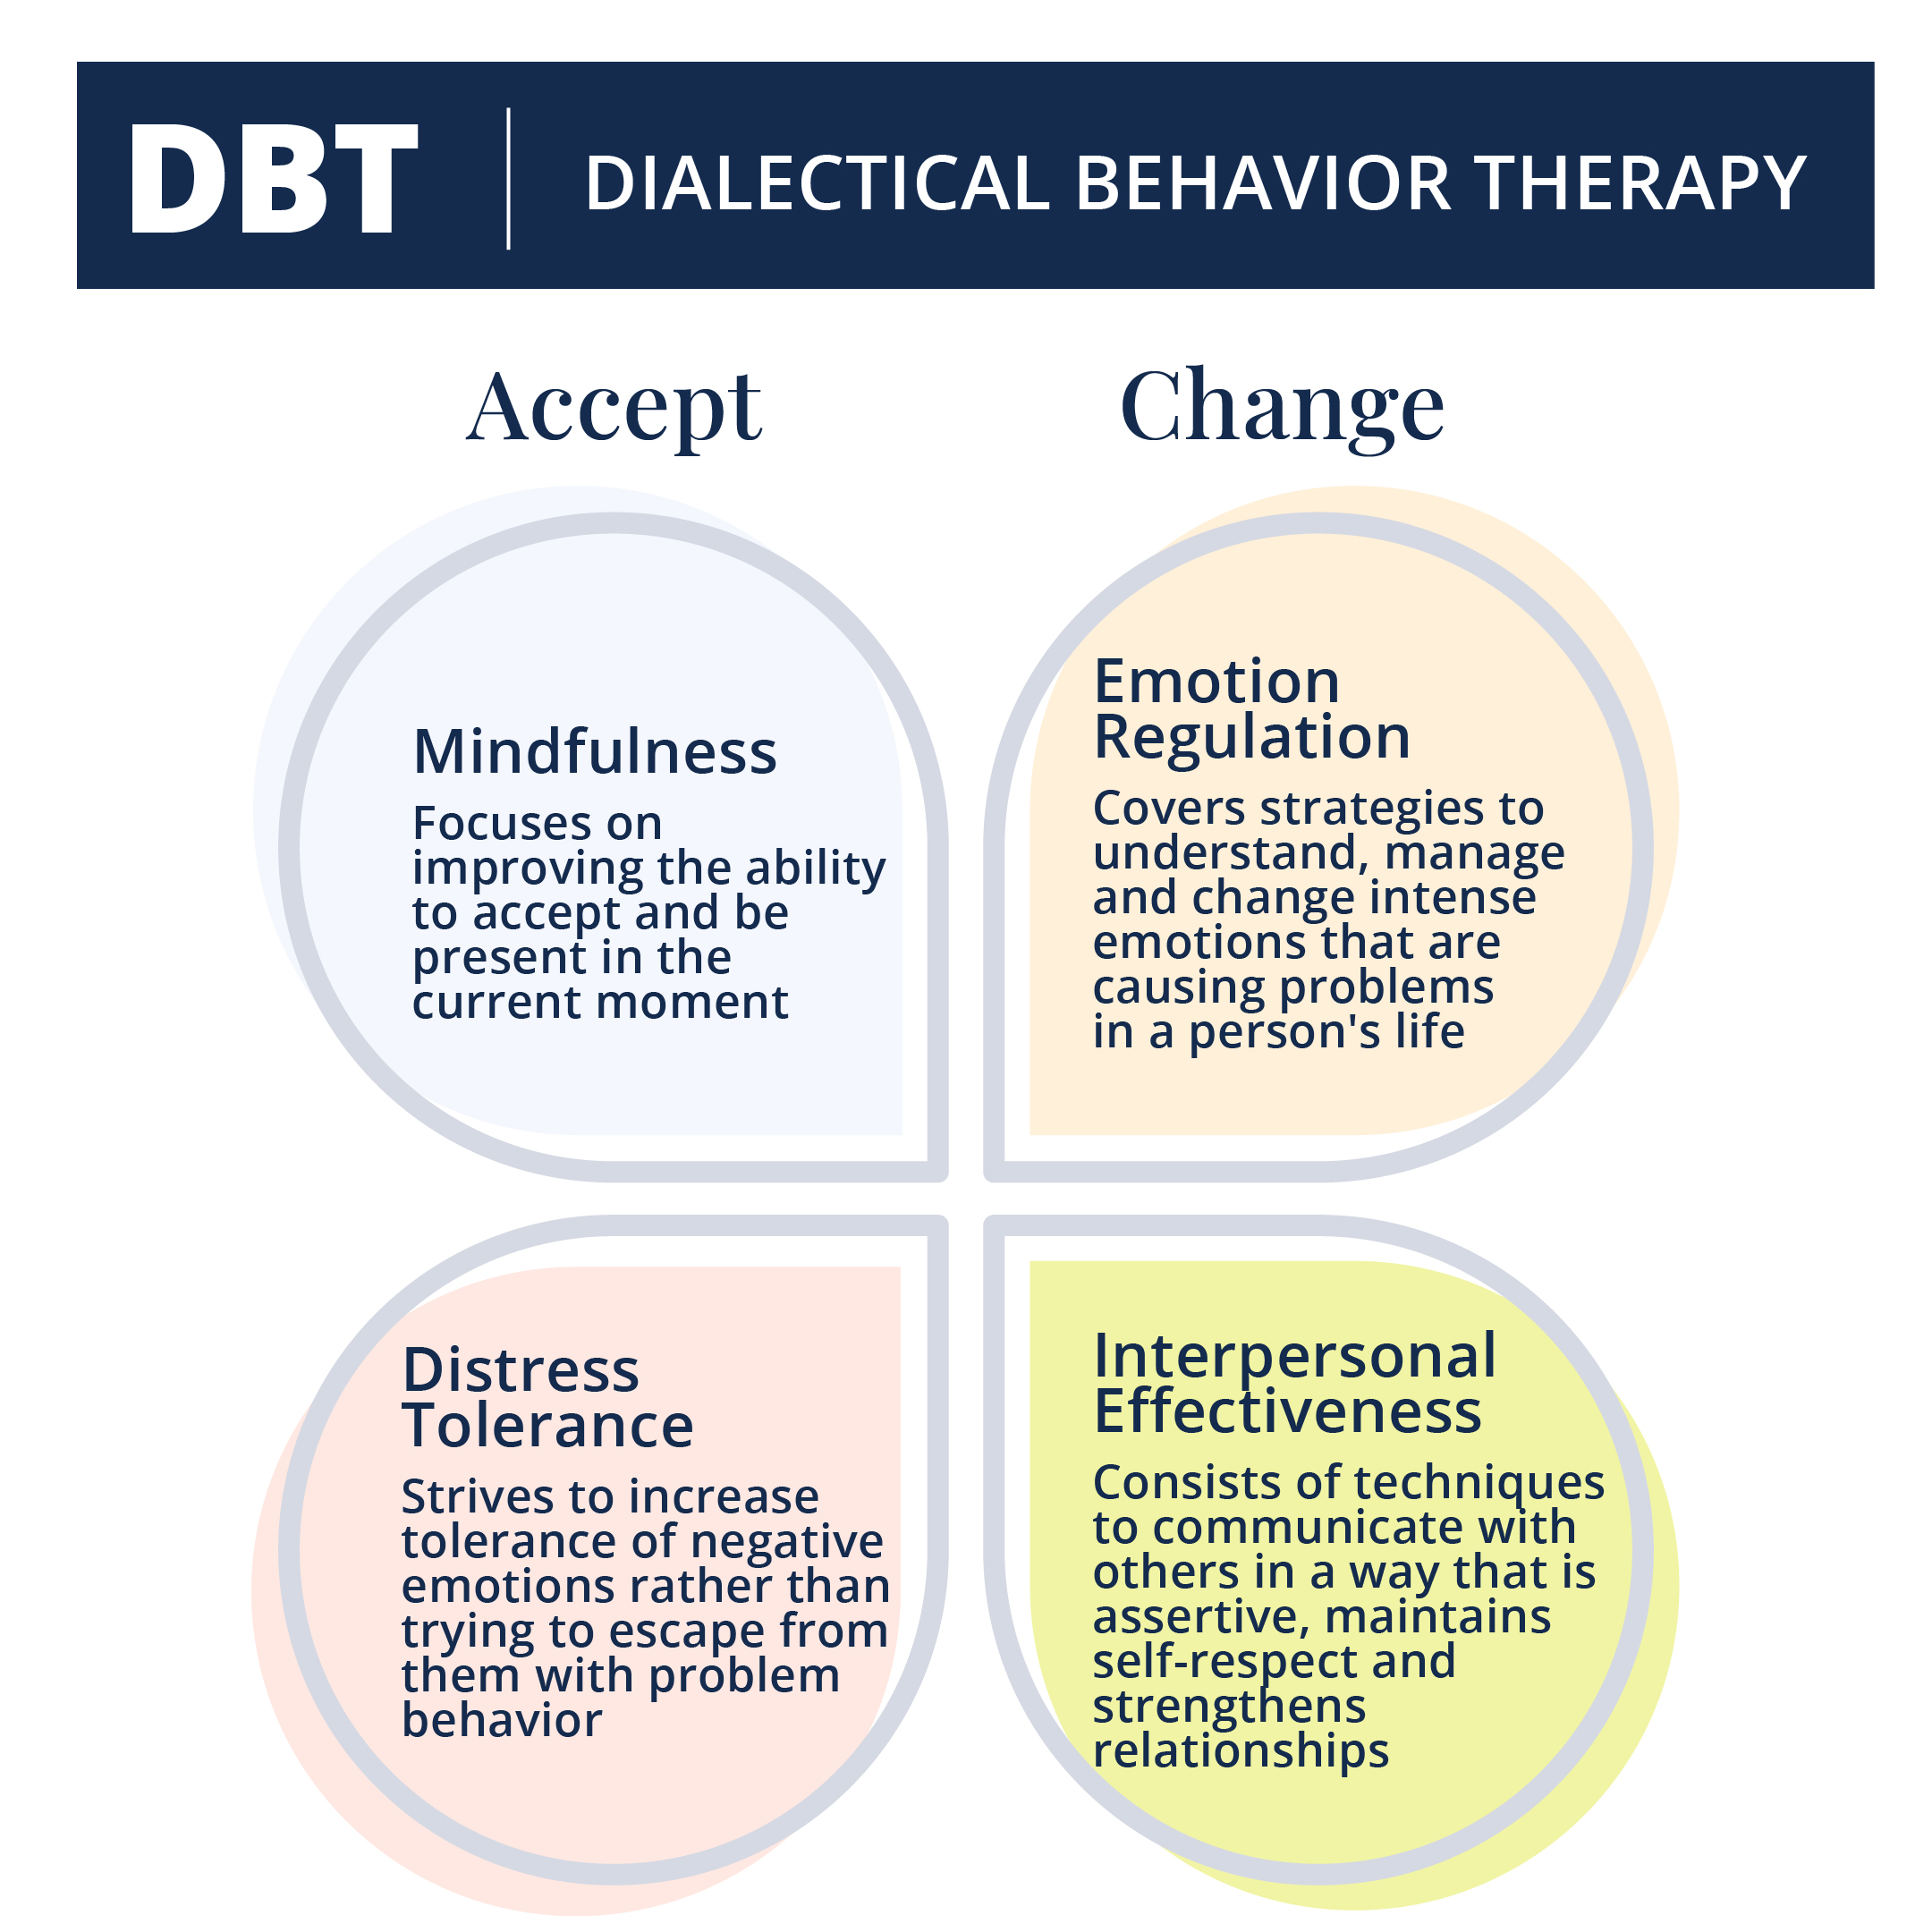 10 Best Dbt Images In 2020 Dbt Therapy Worksheets Beh - vrogue.co